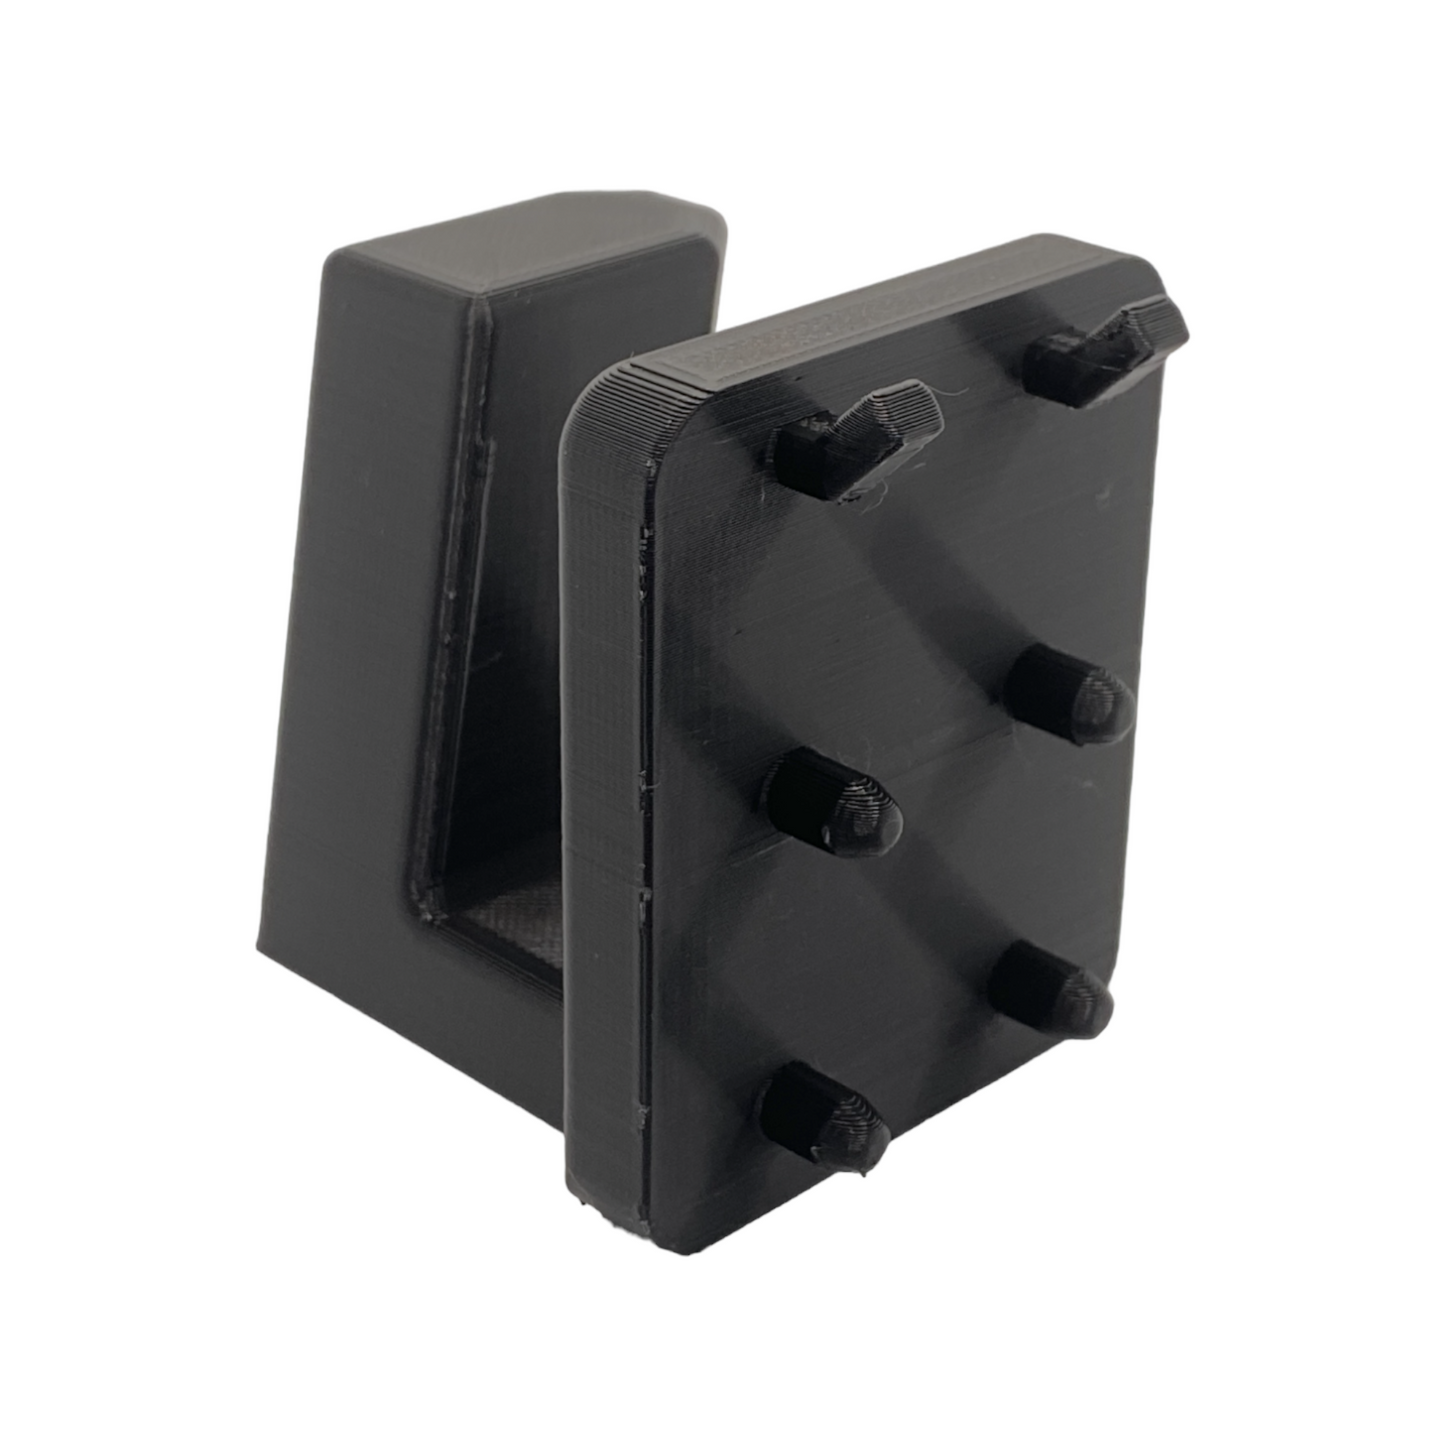 CZ Pegboard Mount for 75B/85B/SP-01/Shadow/P-07/P-10